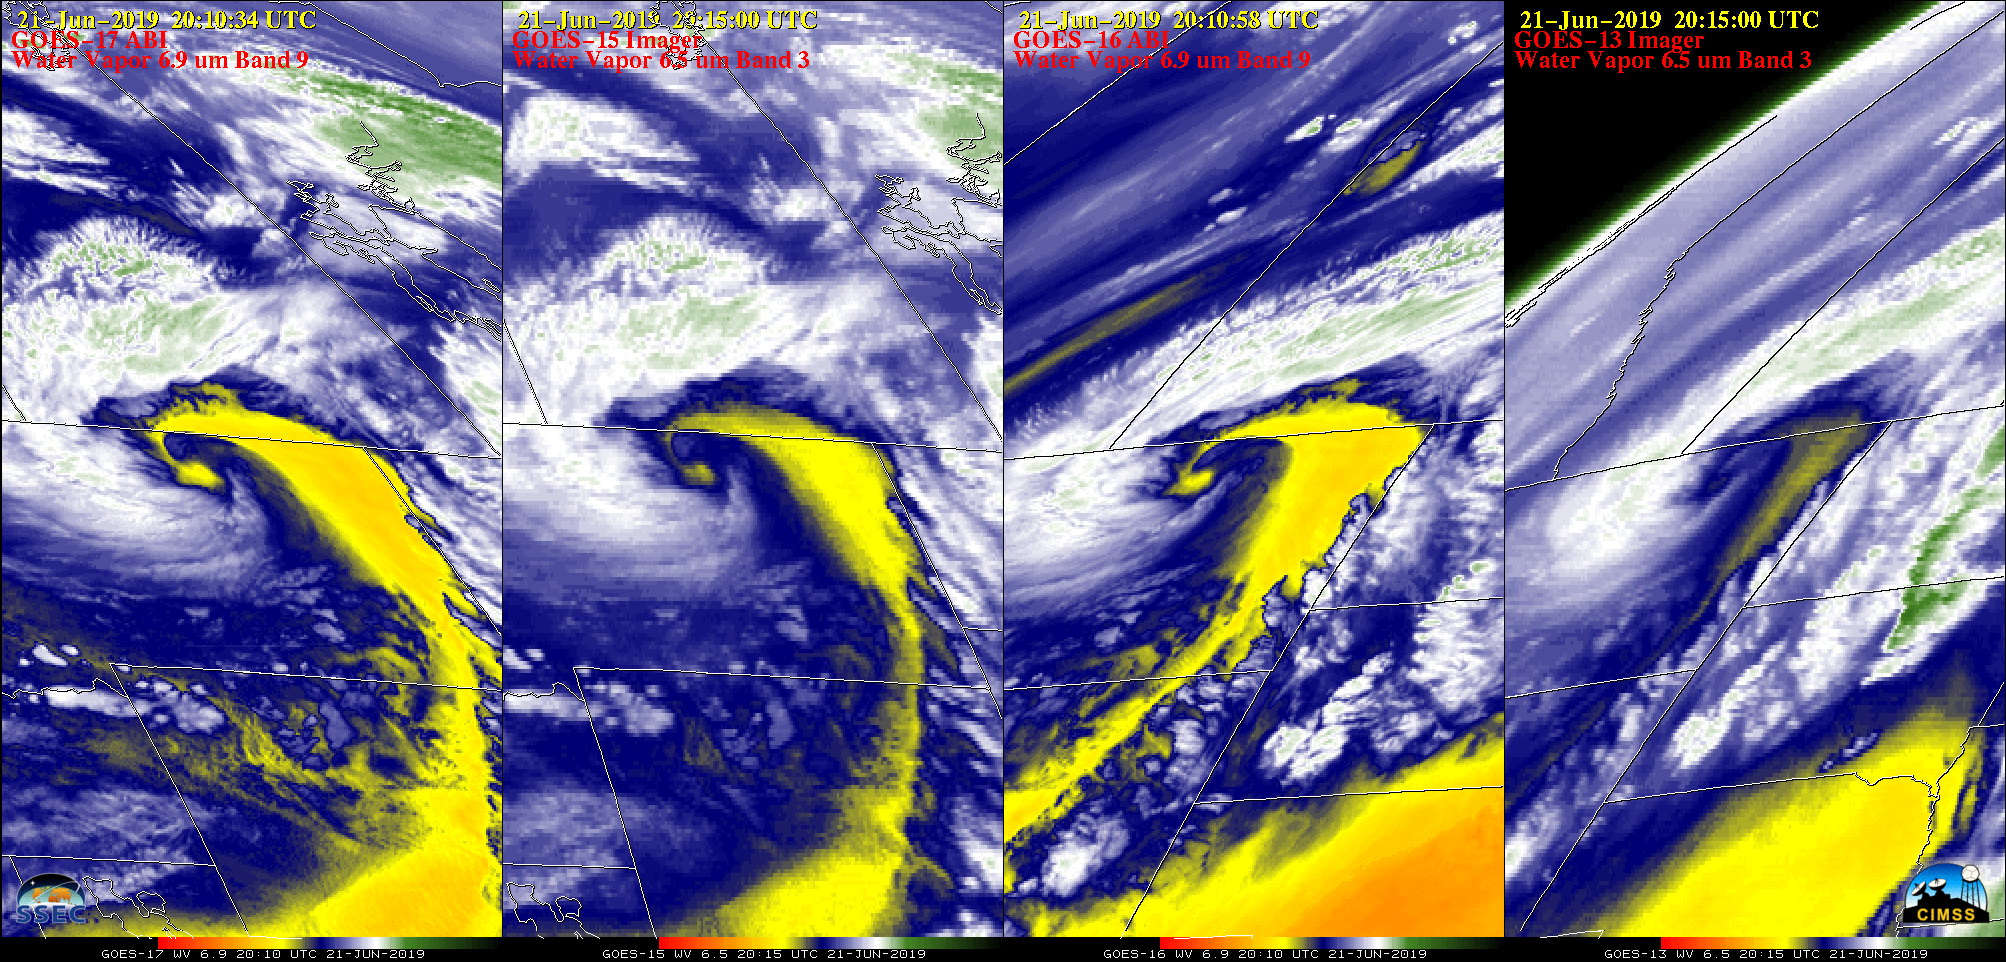 Water Vapor images from GOES-17, GOES-15, GOES-16 and GOES-13, all centered at Glasgow, Montana [click to play animation | MP4]